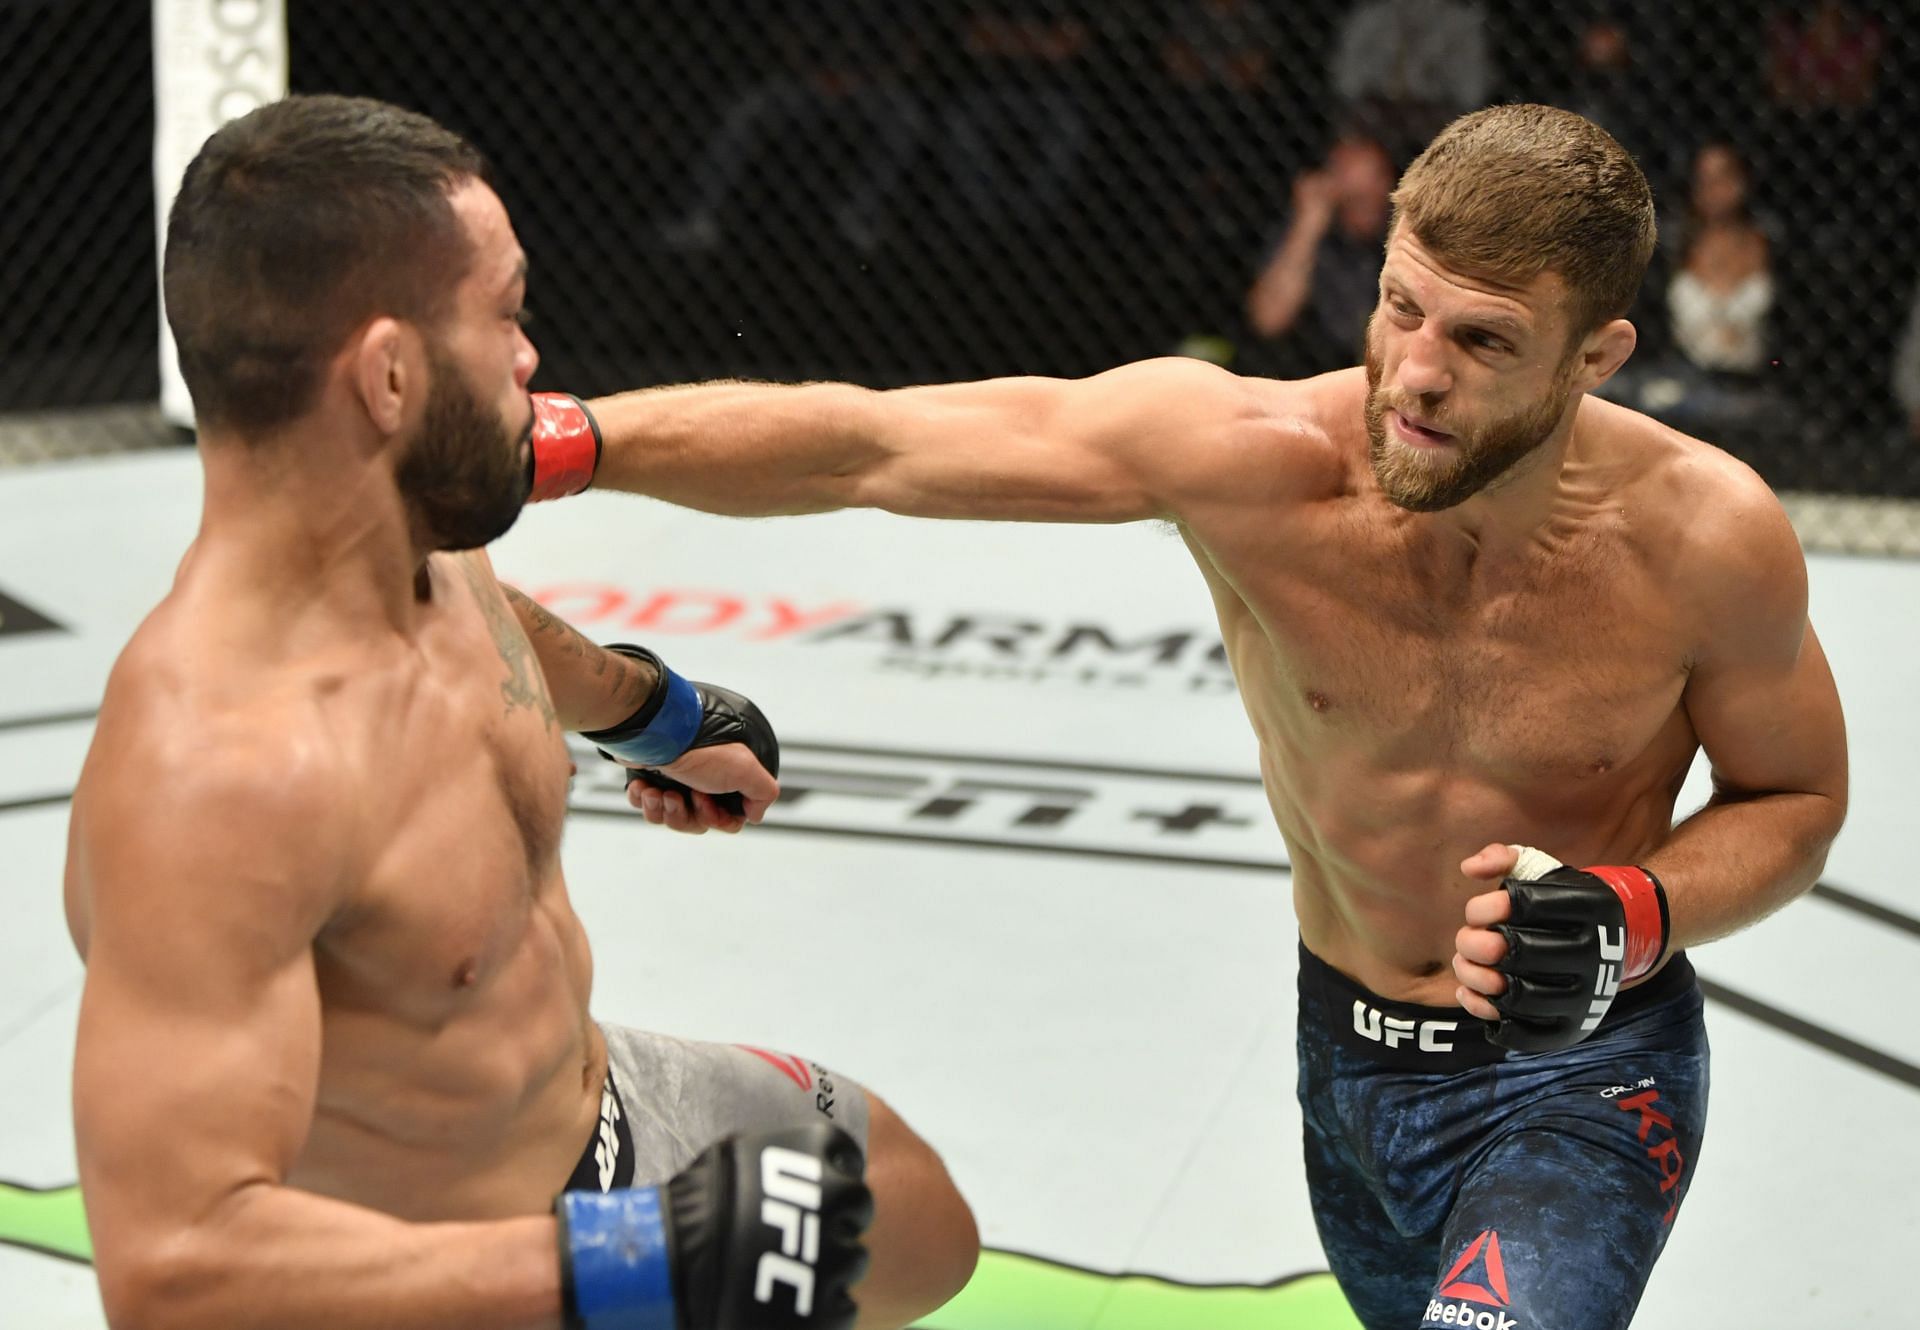 Calvin Kattar now holds a record of 23-5